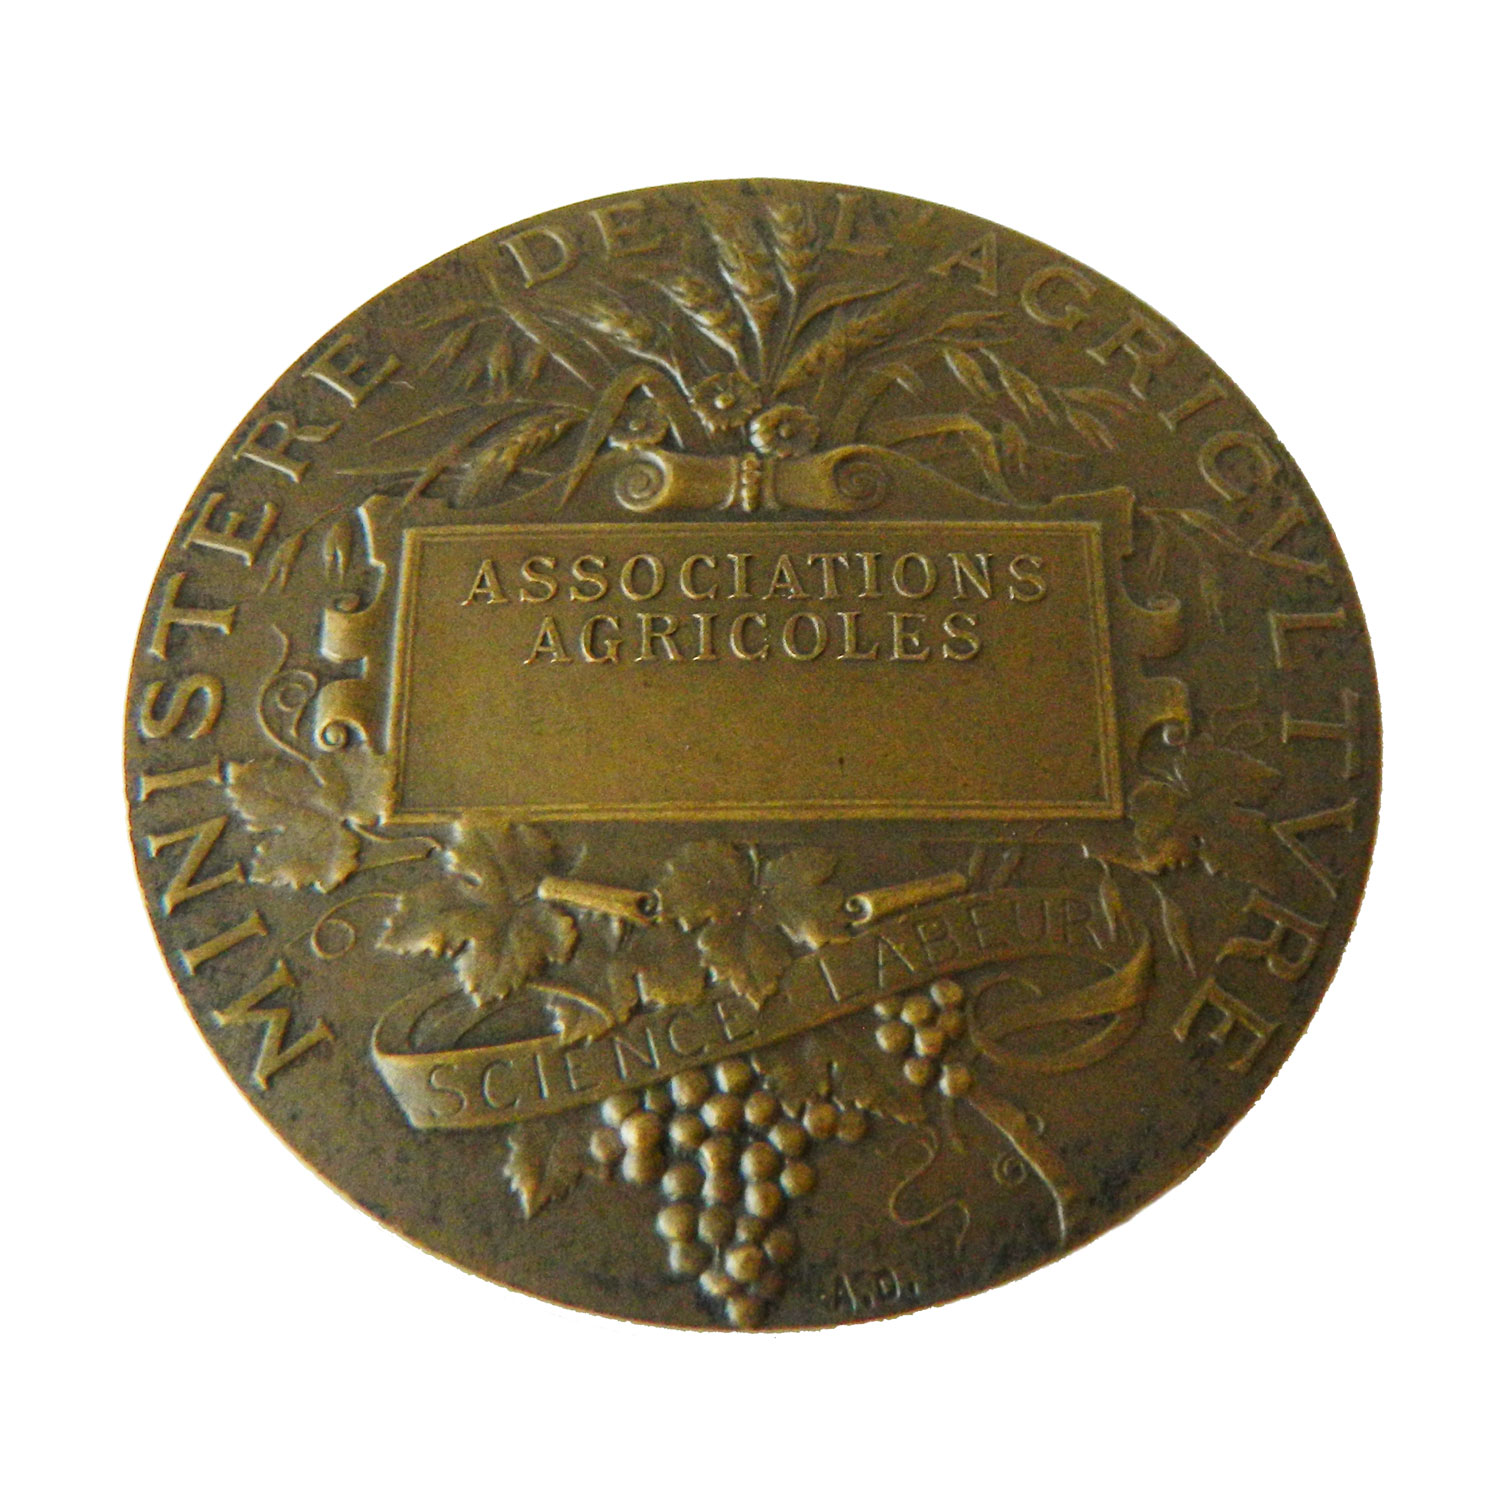 Antique wine growers medal